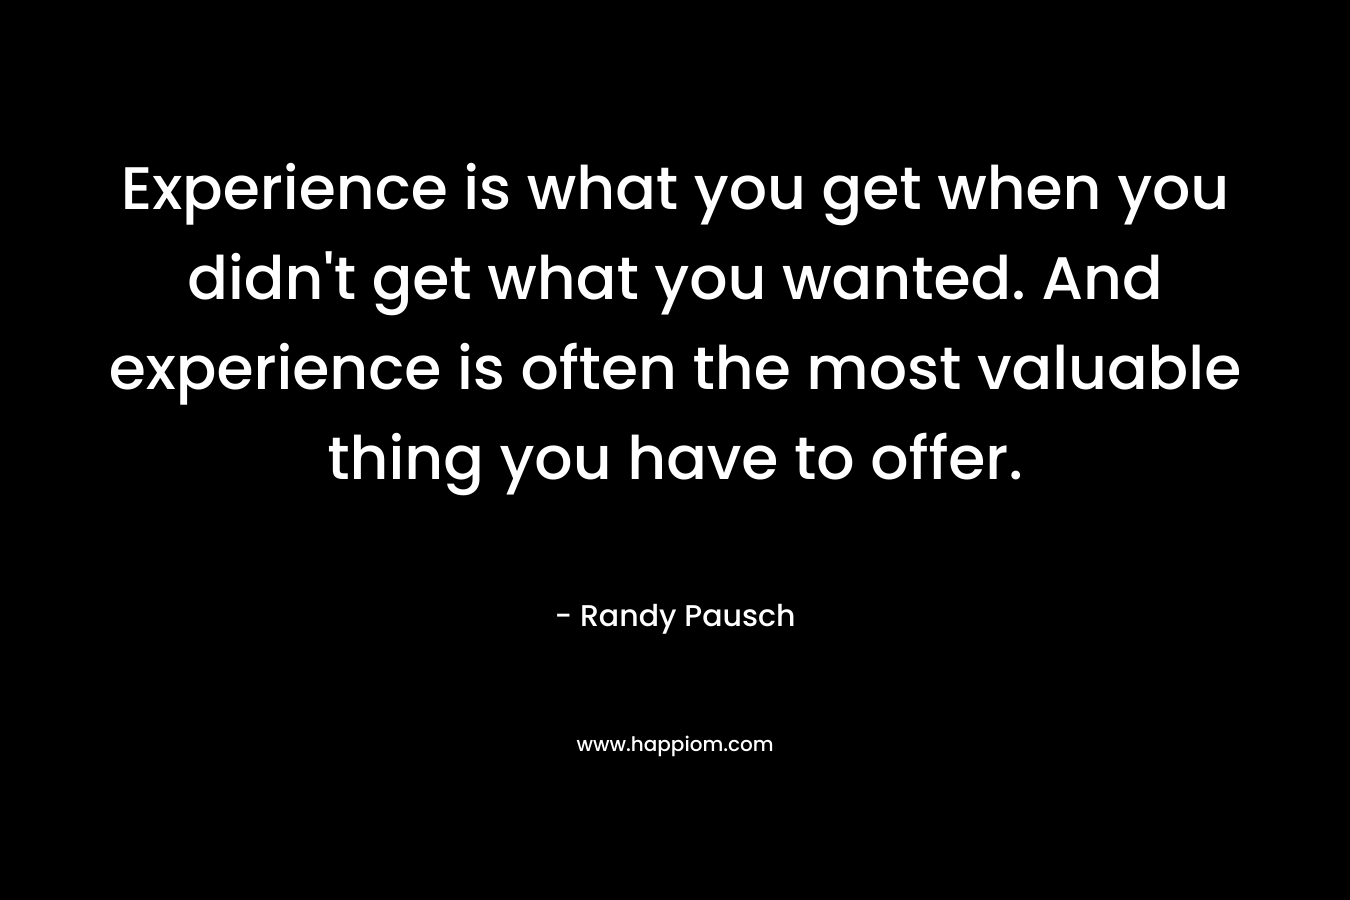 Experience is what you get when you didn’t get what you wanted. And experience is often the most valuable thing you have to offer. – Randy Pausch